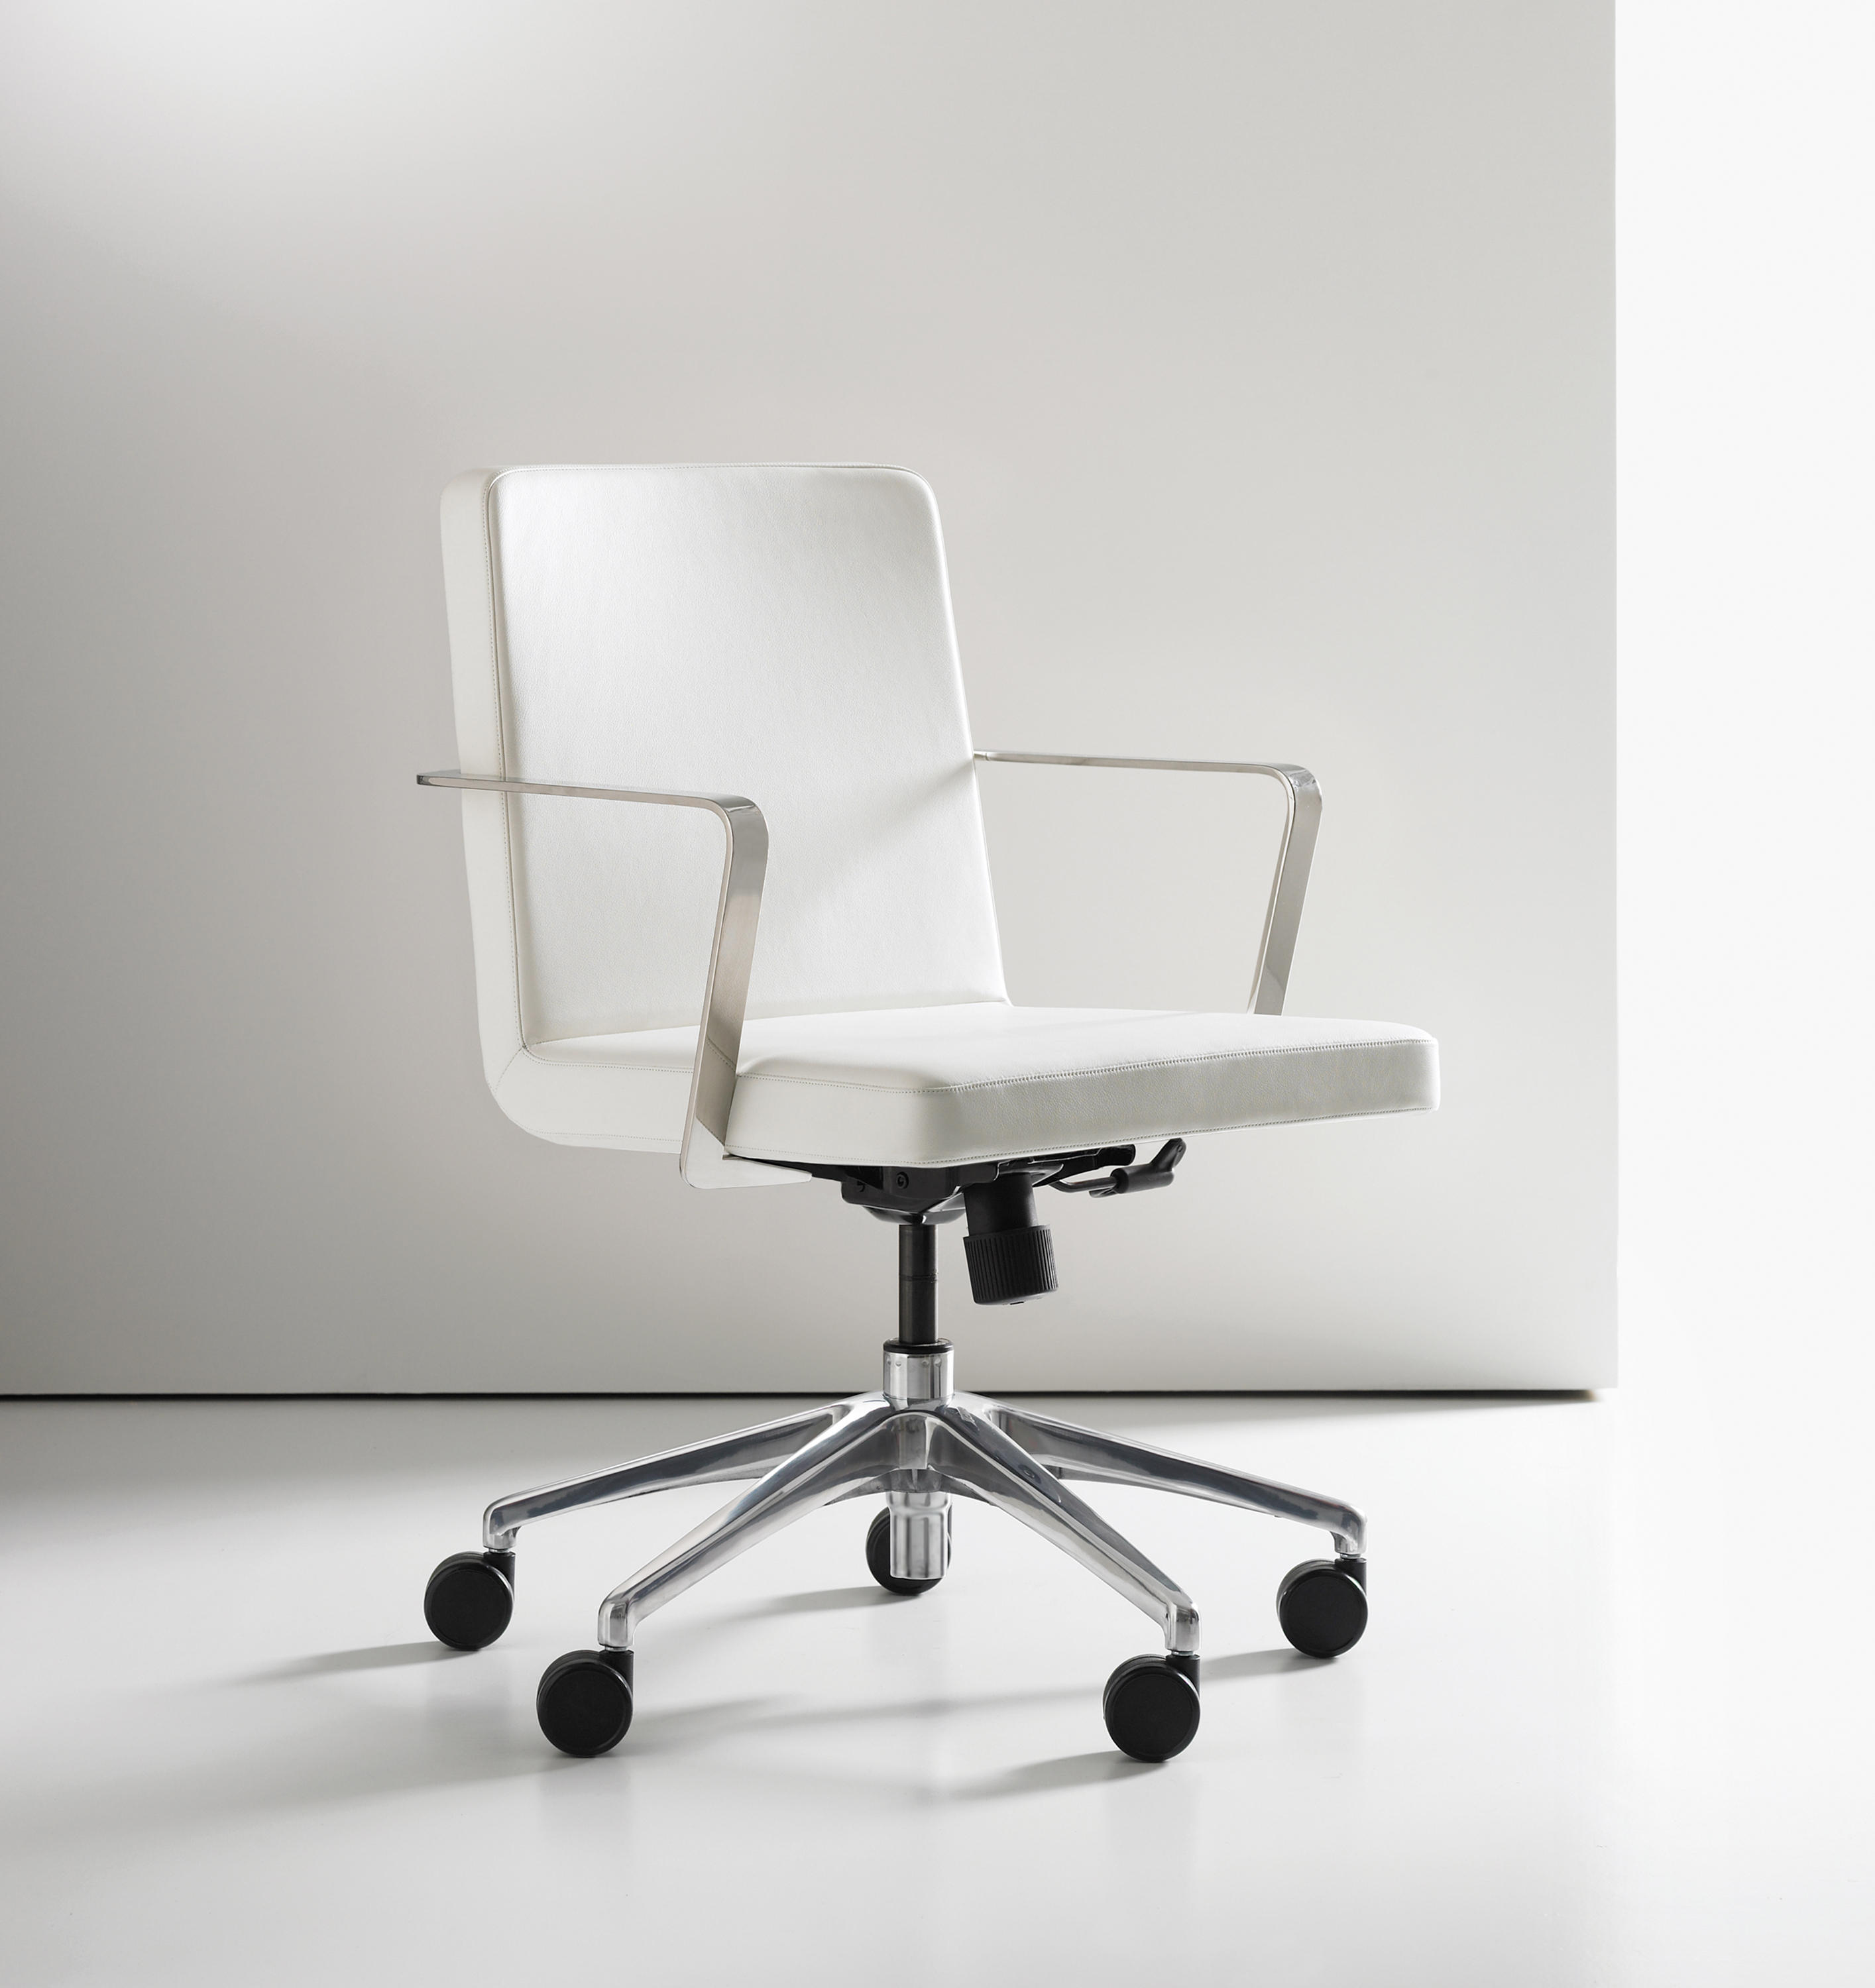 DUET - Task chairs from Bernhardt Design | Architonic